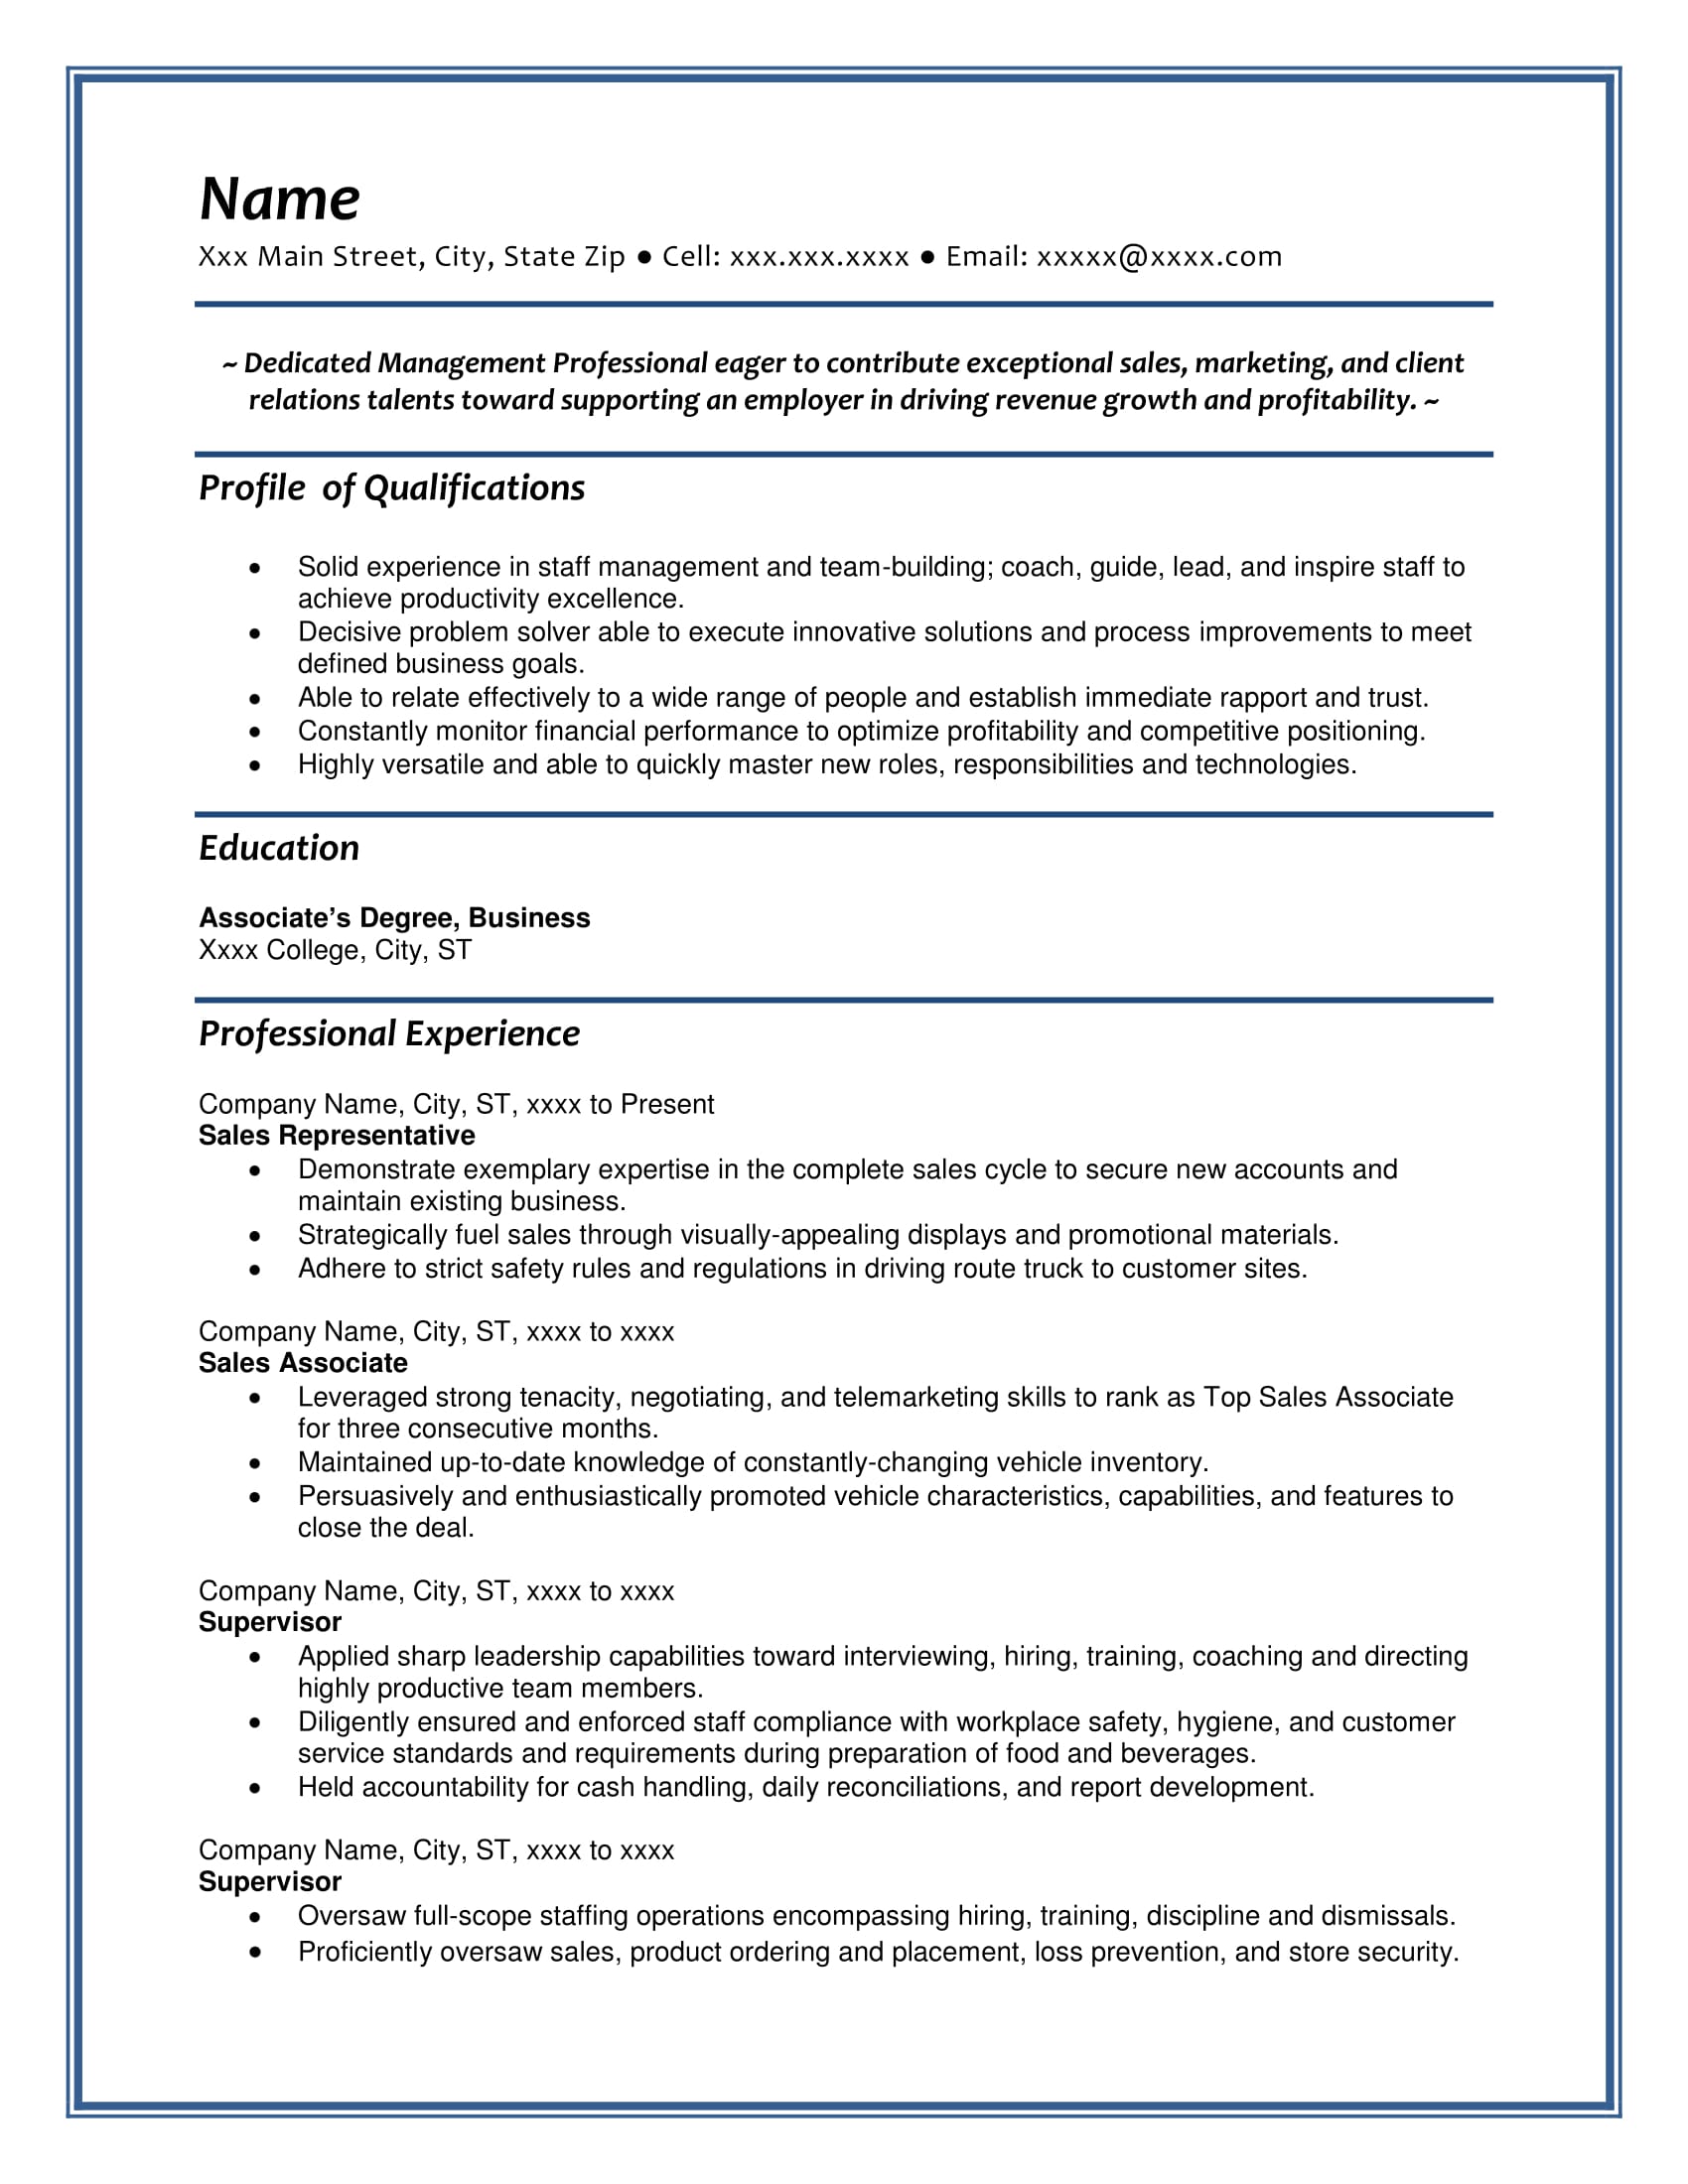 professional resume free template